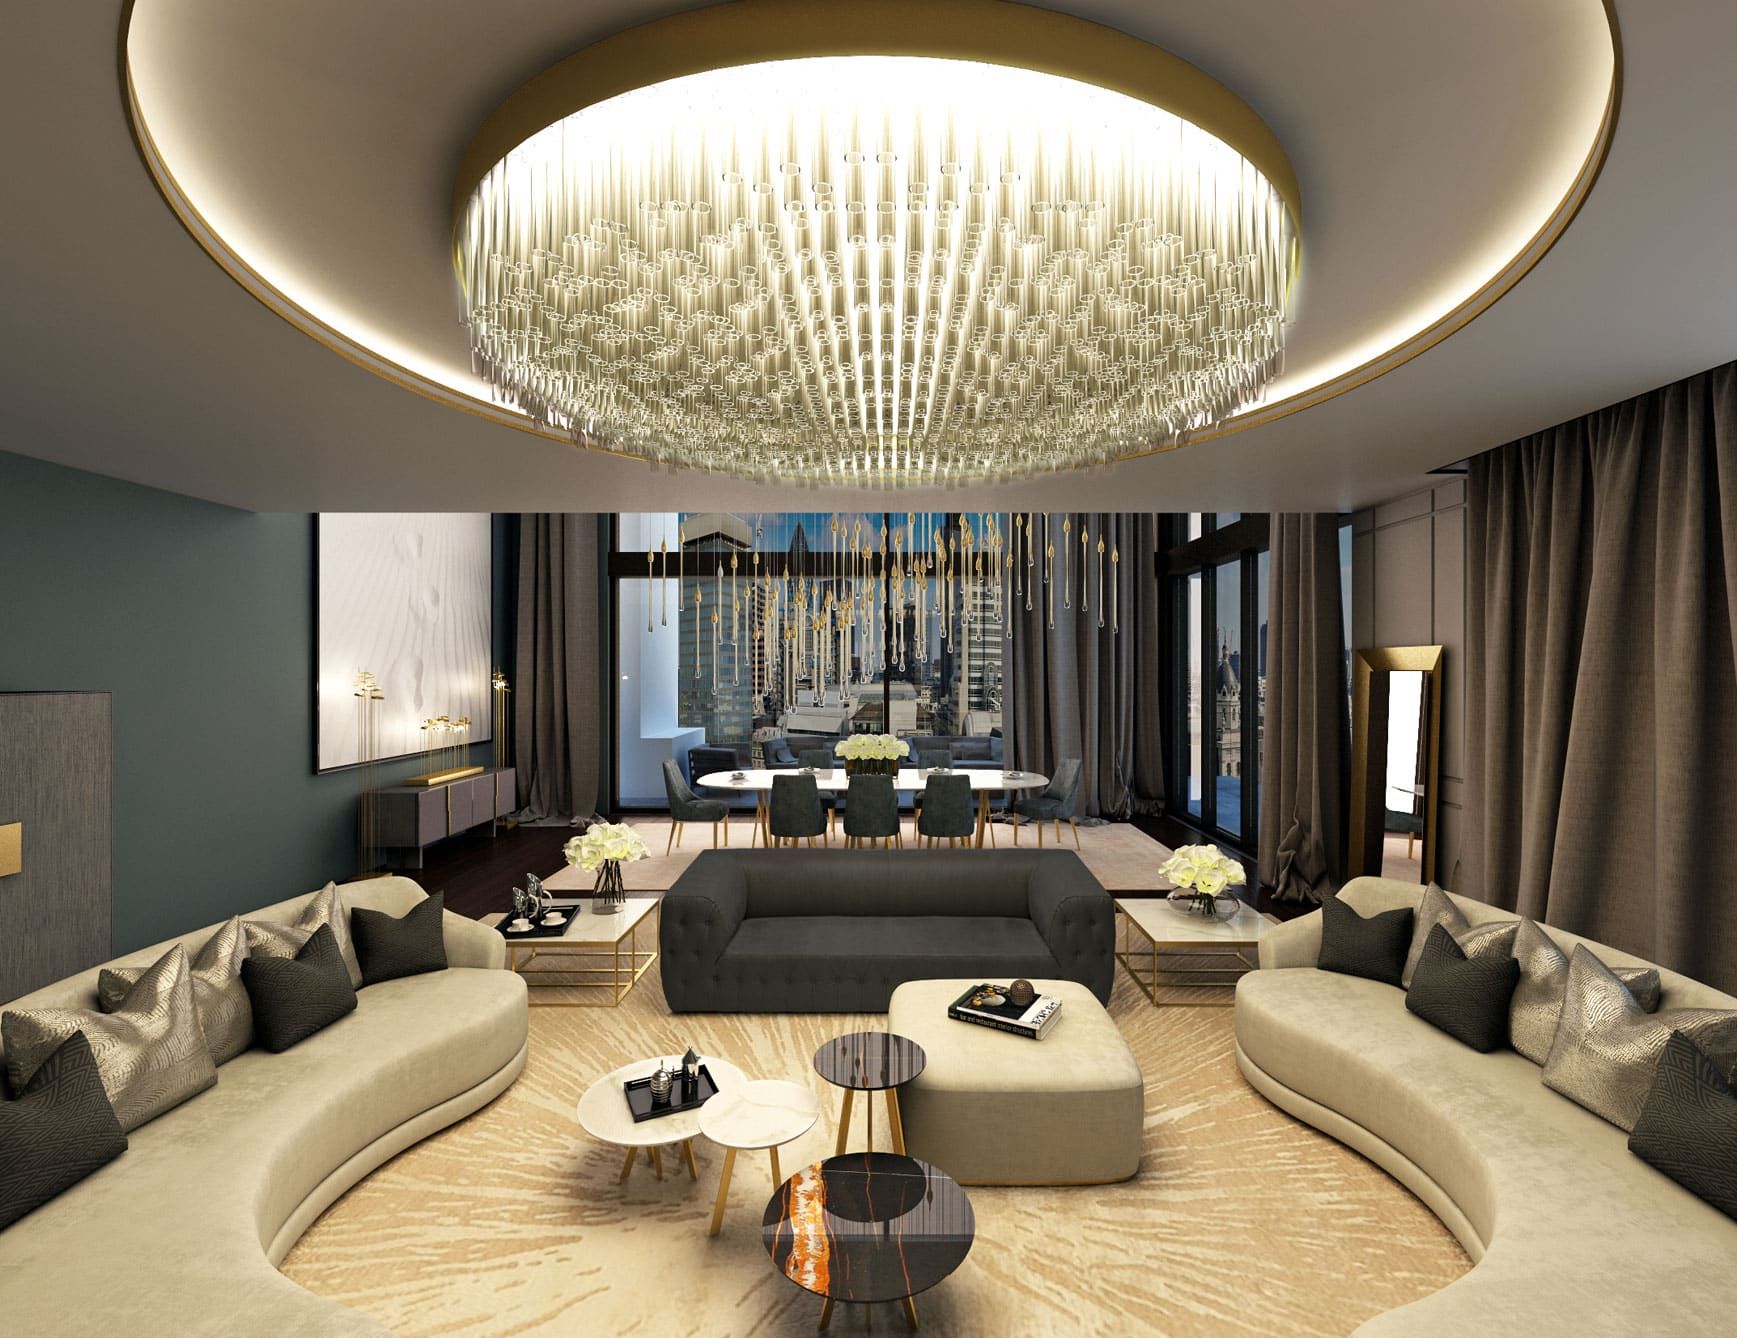 Penthouse modern luxury chandelier with gold metal